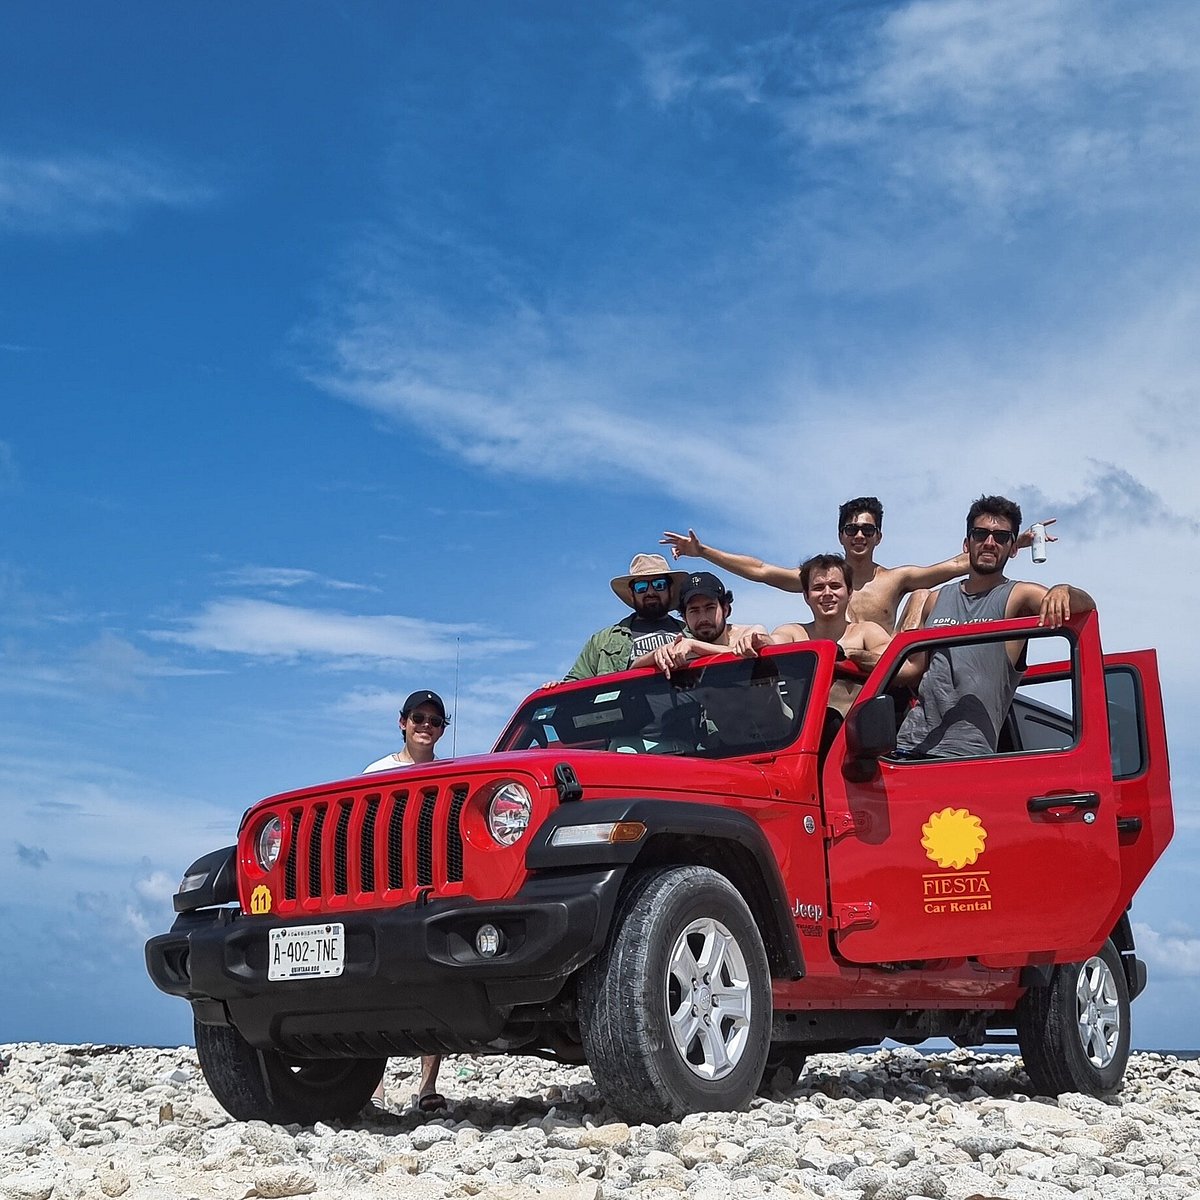 FIESTA CAR RENTAL (Cozumel) - All You Need to Know BEFORE You Go